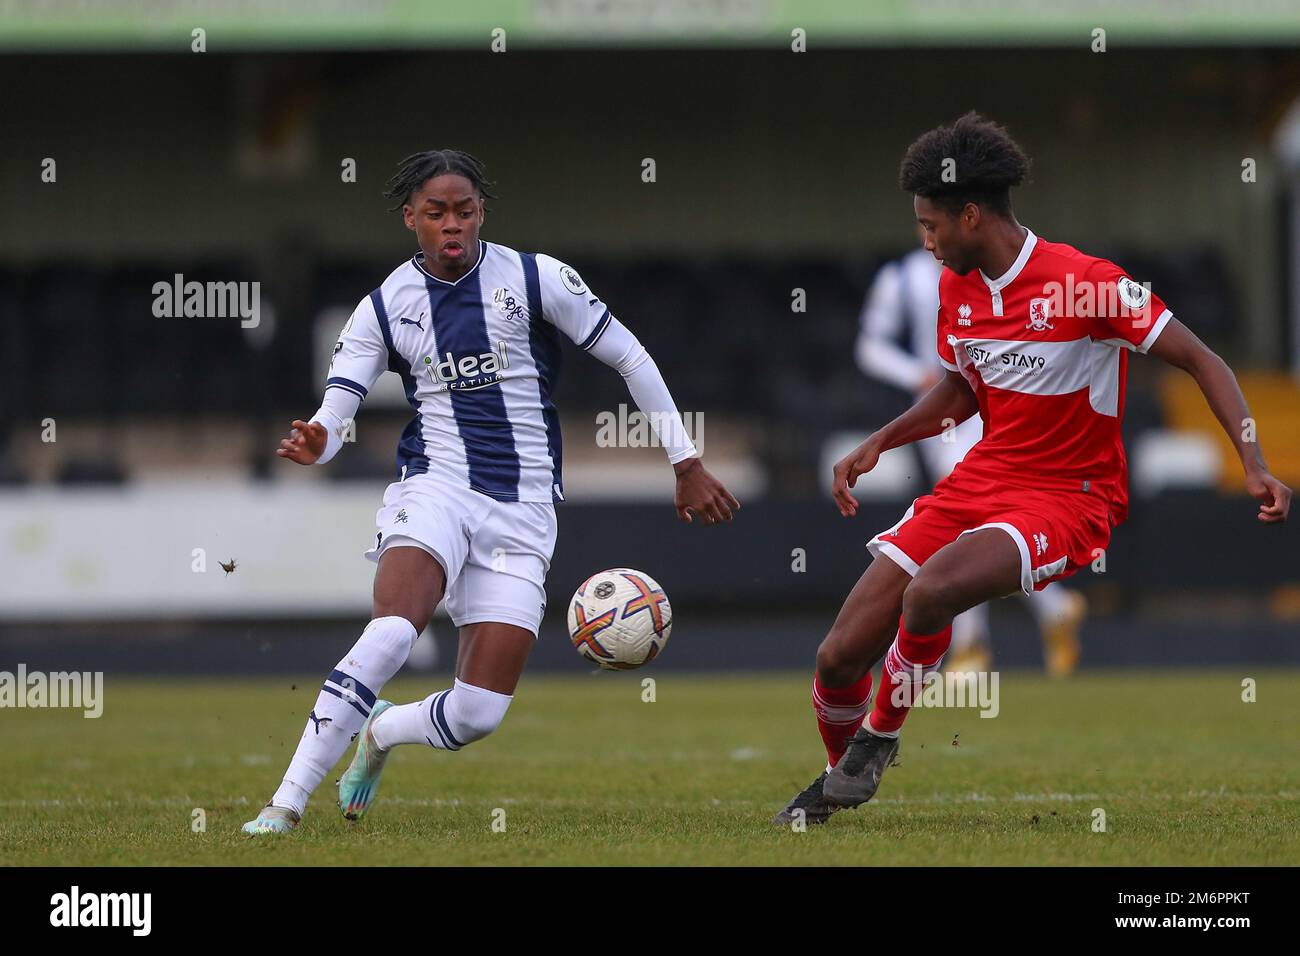 Hednesford, UK. 05th Jan, 2023. Akeel Higgins of West Bromwich Albion in action during the Premier League Cup match West Bromwich Albion vs Middlesbrough U23's at Keys Park, Hednesford, United Kingdom, 5th January 2023 (Photo by Gareth Evans/News Images) Credit: News Images LTD/Alamy Live News Stock Photo